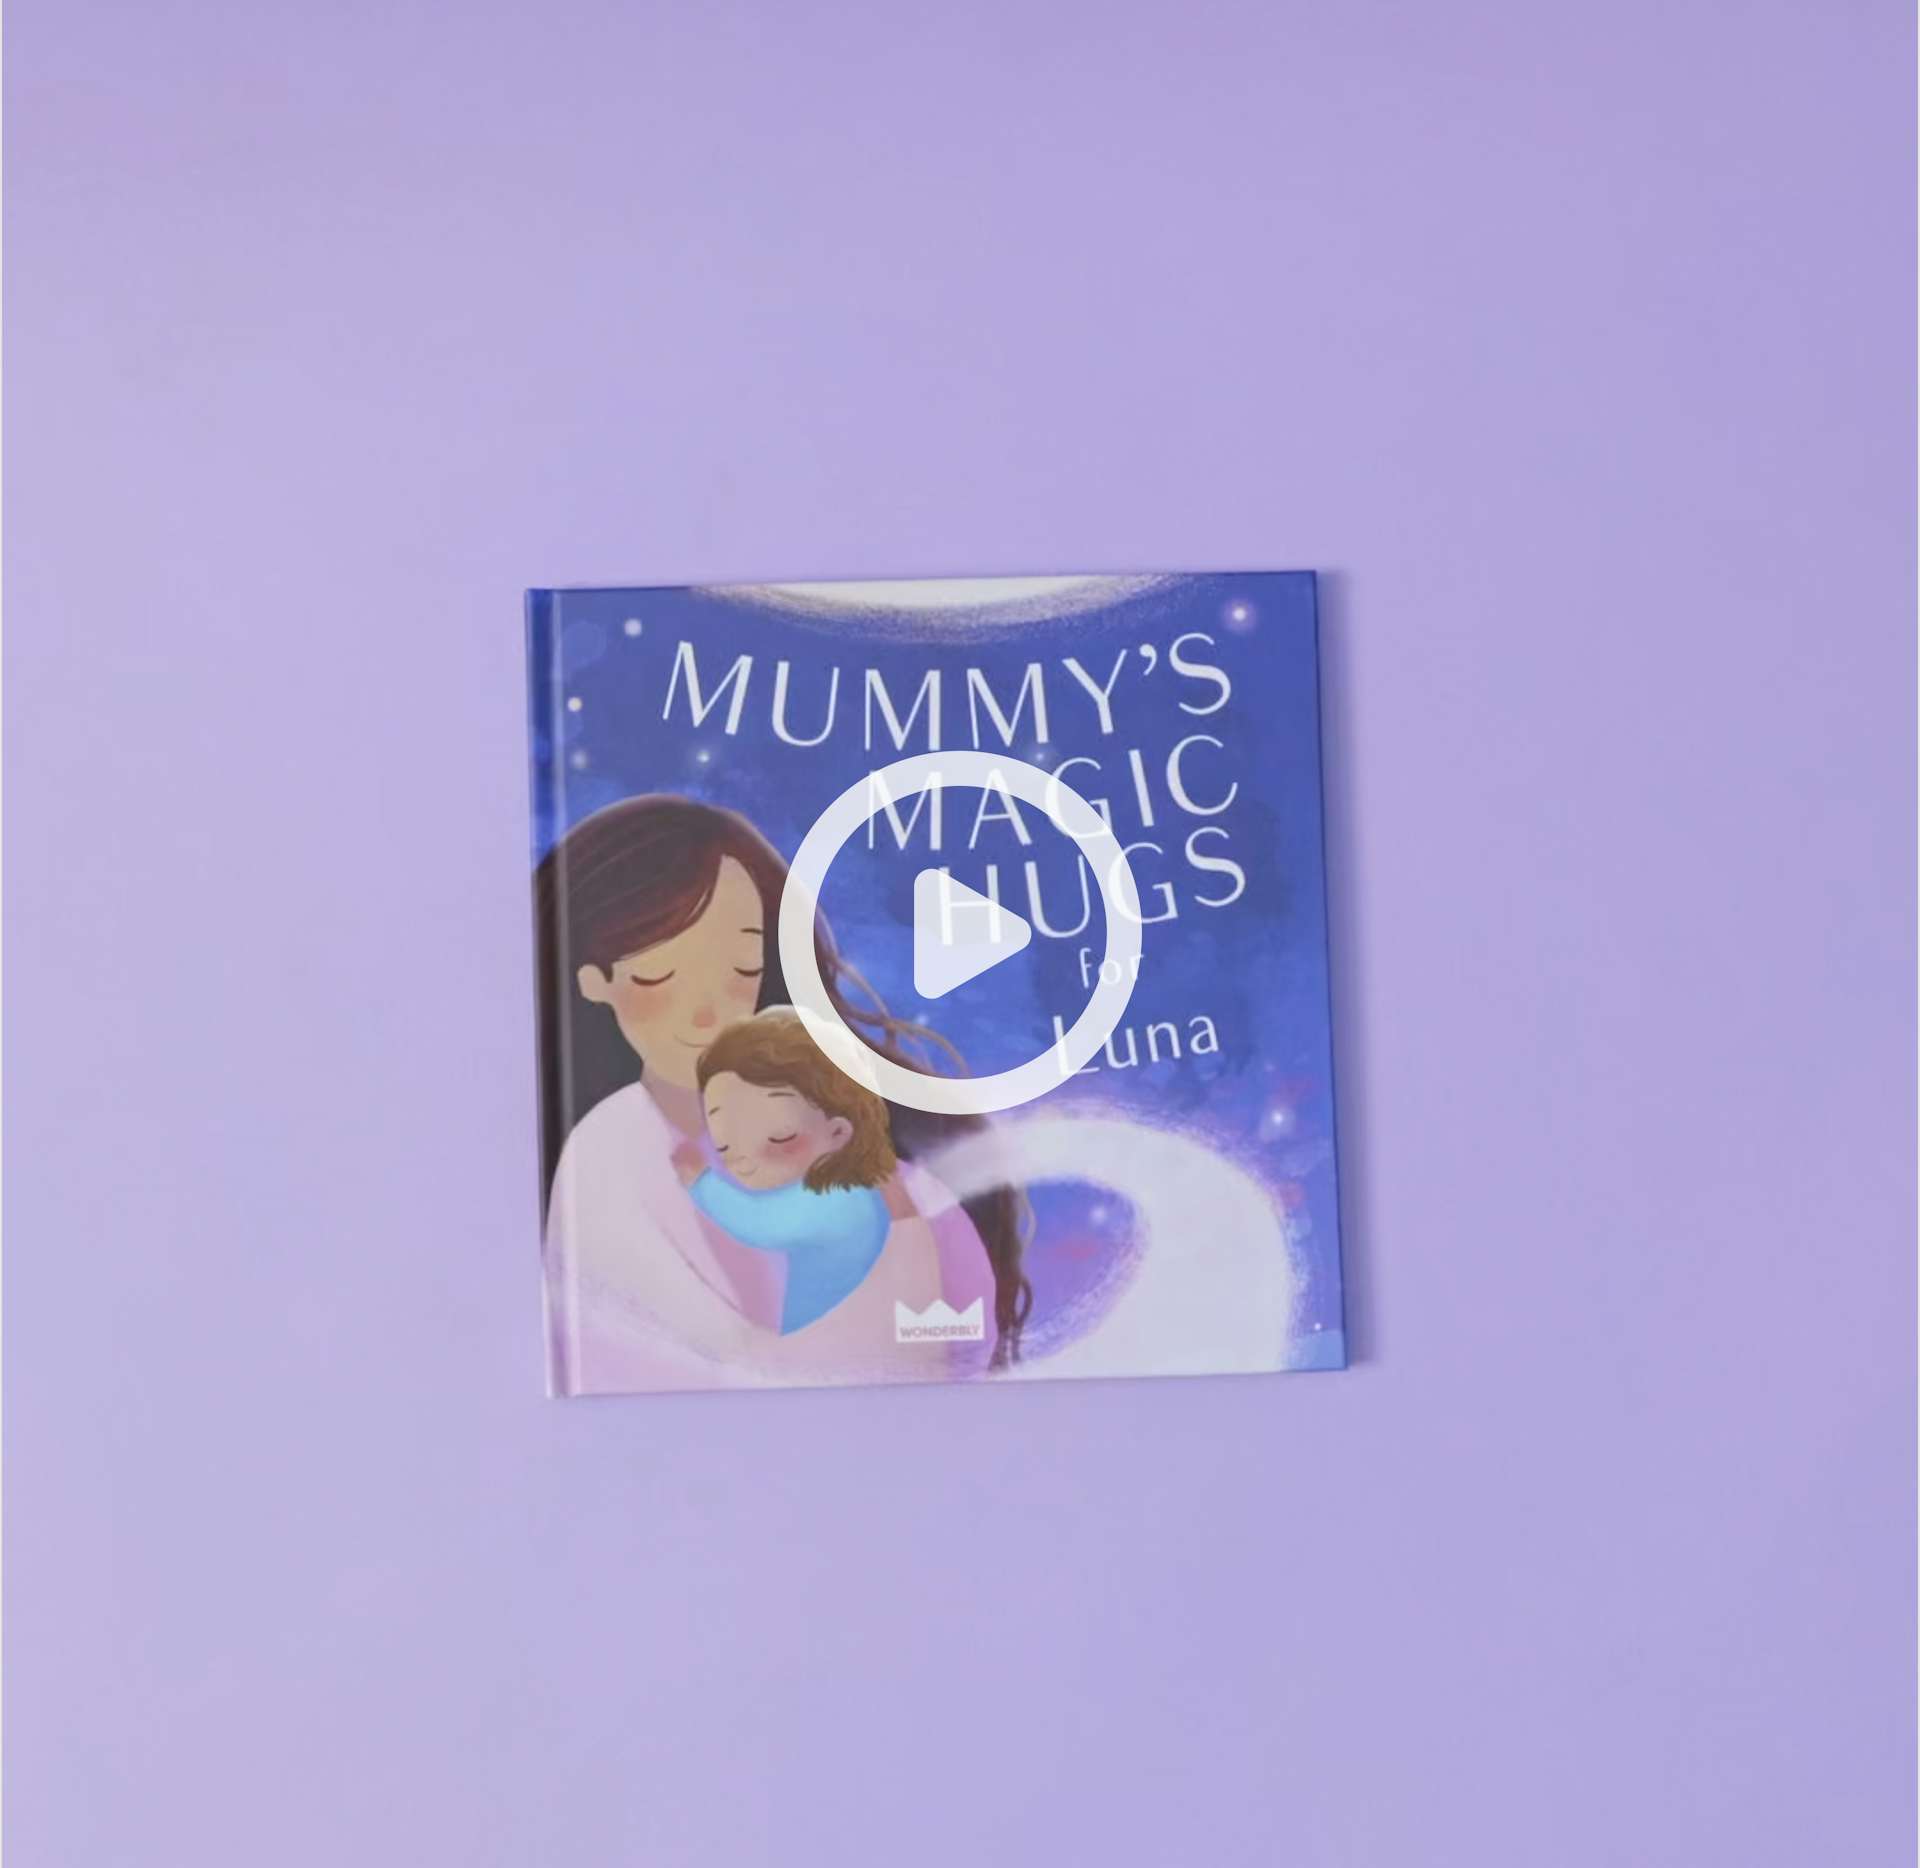 mommy's magic hugs book with 'play' icon